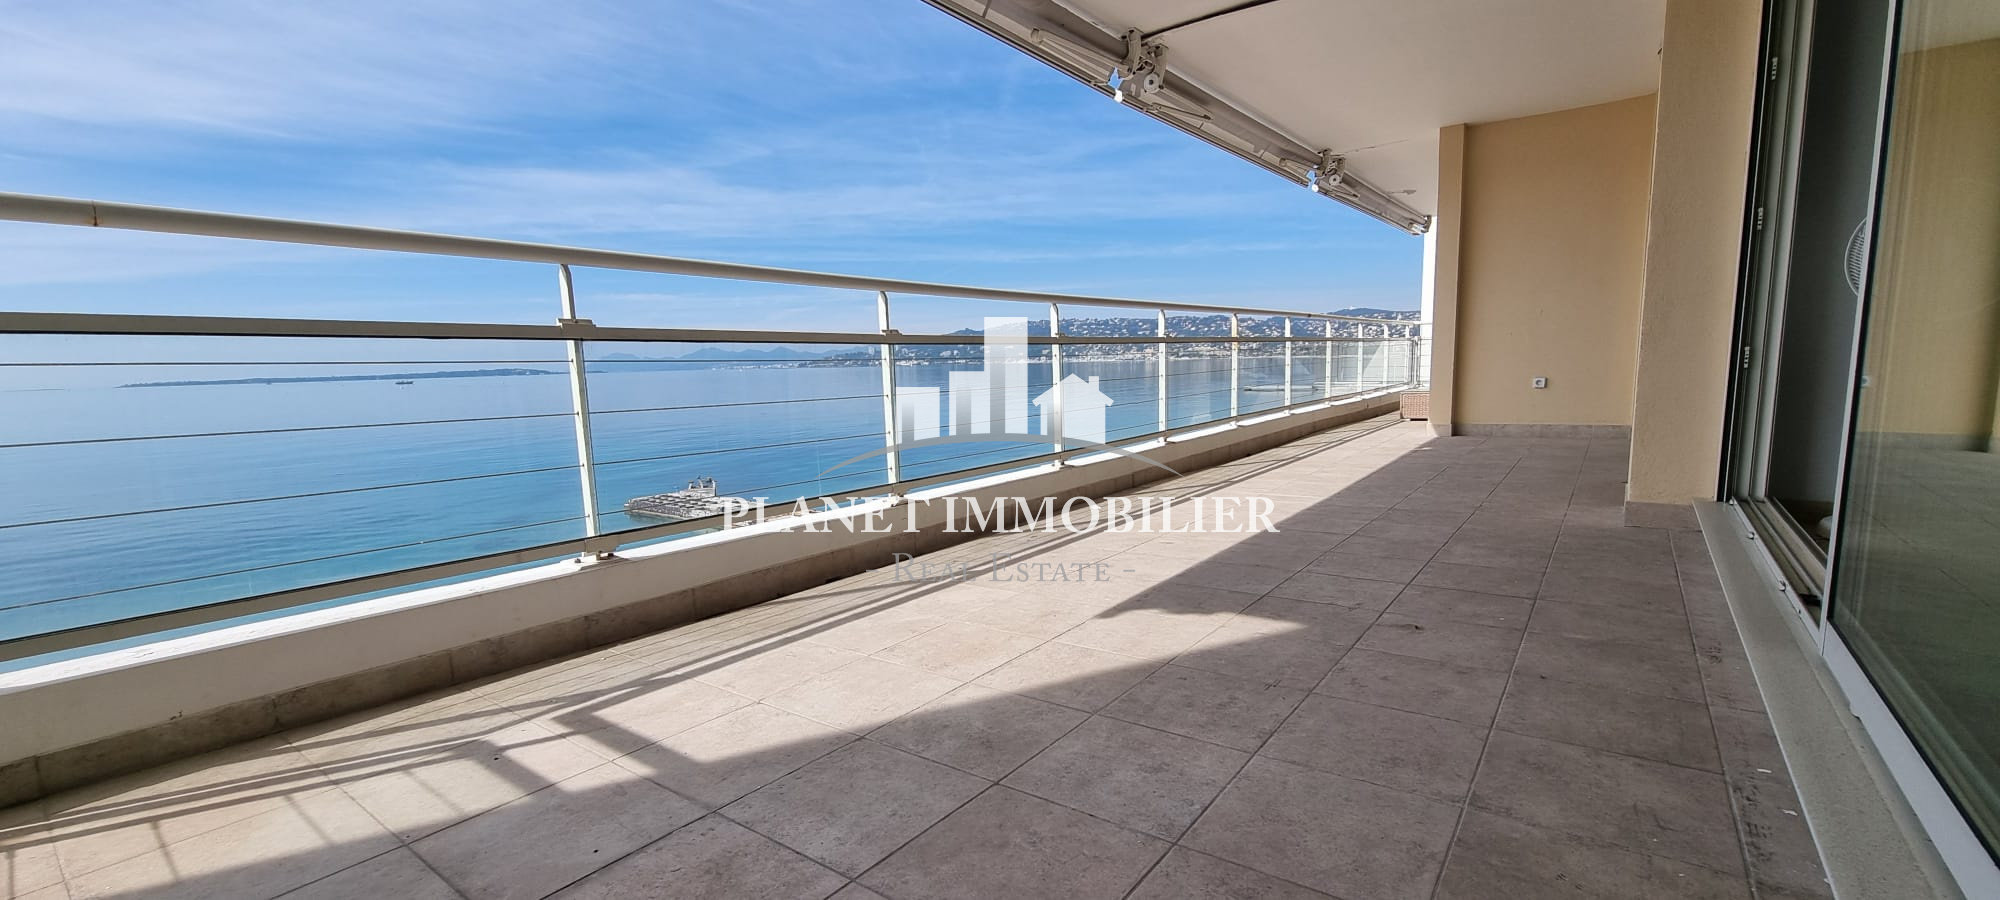 Appartement 5 pièces 135 m² Antibes